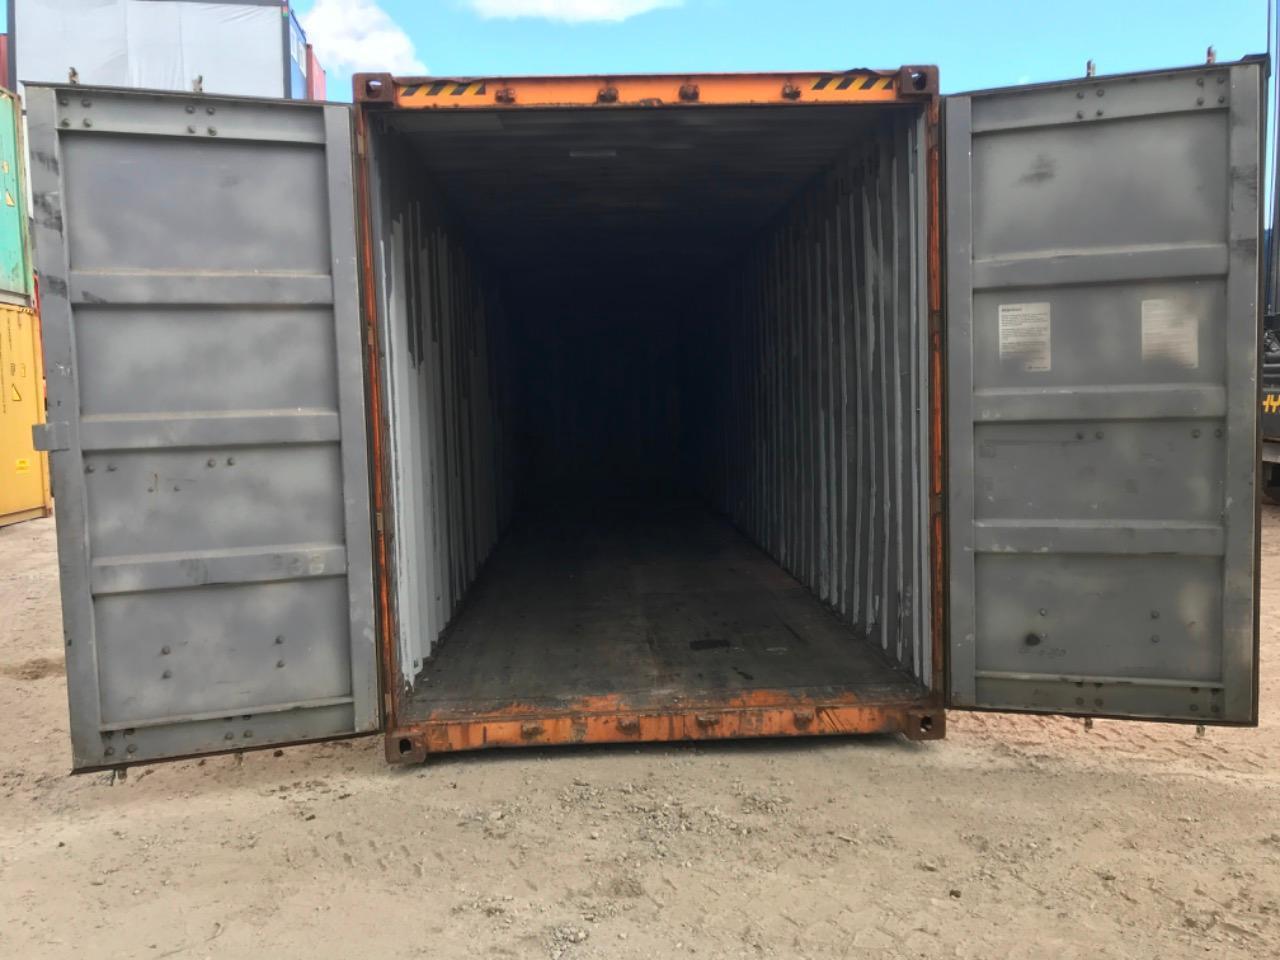 40 fods HC Container - ID: HLXU 655514-2 - ( St...